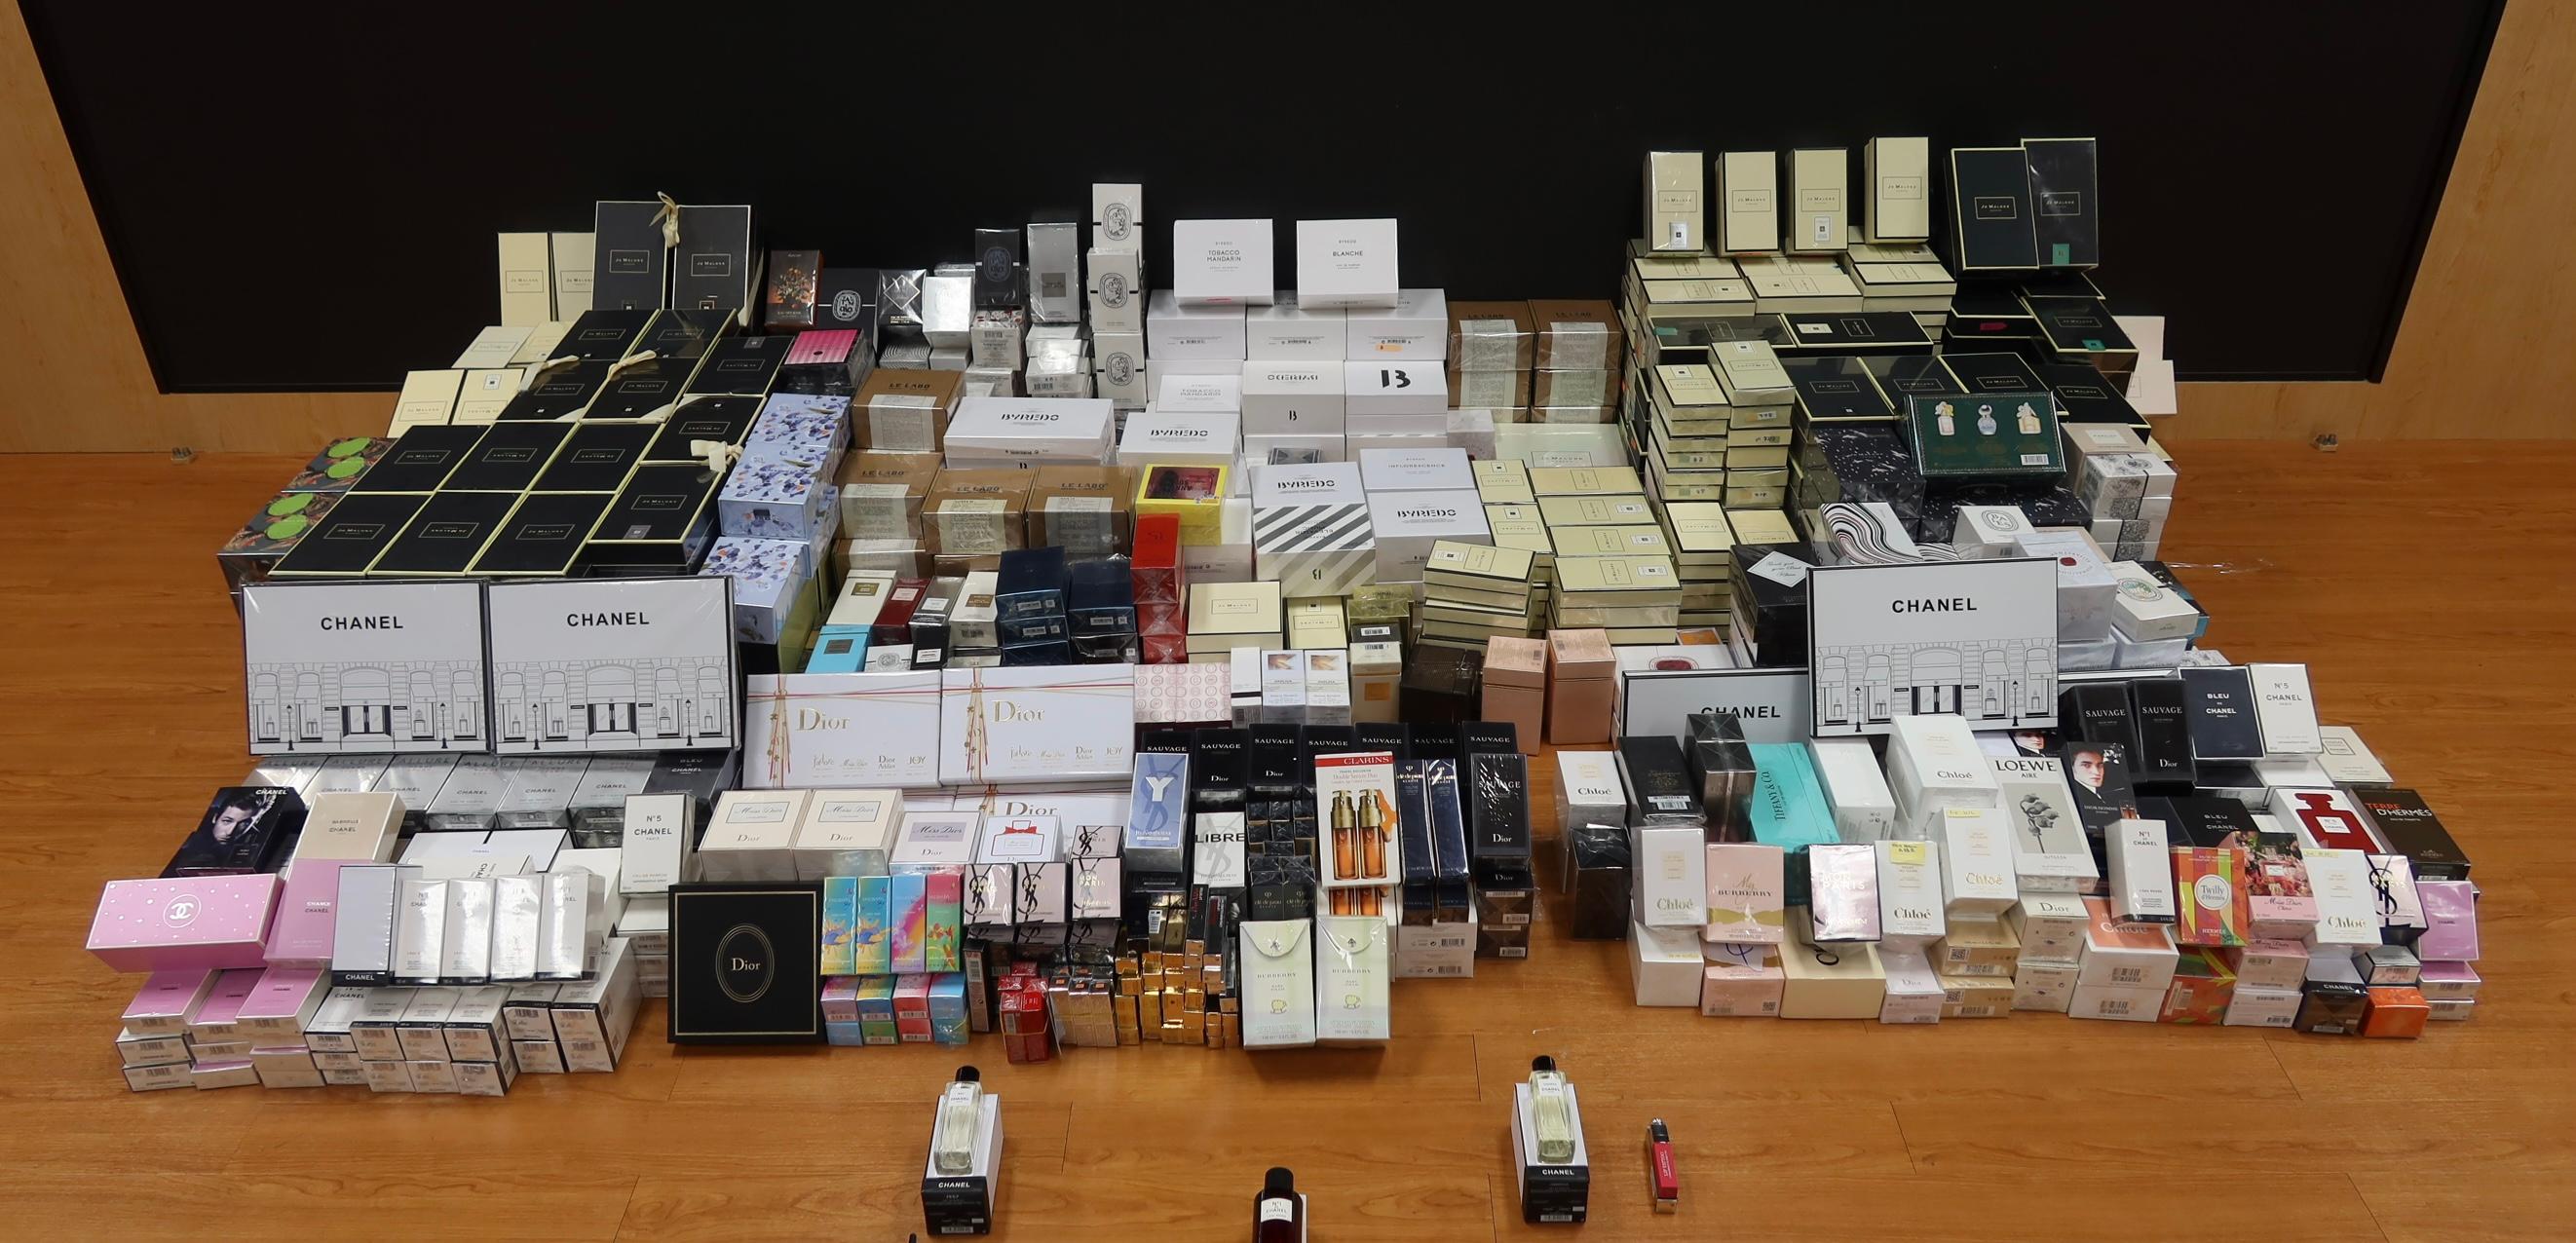 Hong Kong Customs on September 29 conducted an enforcement operation to combat the online sale of counterfeit perfume and cosmetics products with seizures of about 1 300 items of suspected counterfeit products with an estimated market value of about $360,000. Photo shows some of the suspected counterfeit products seized.